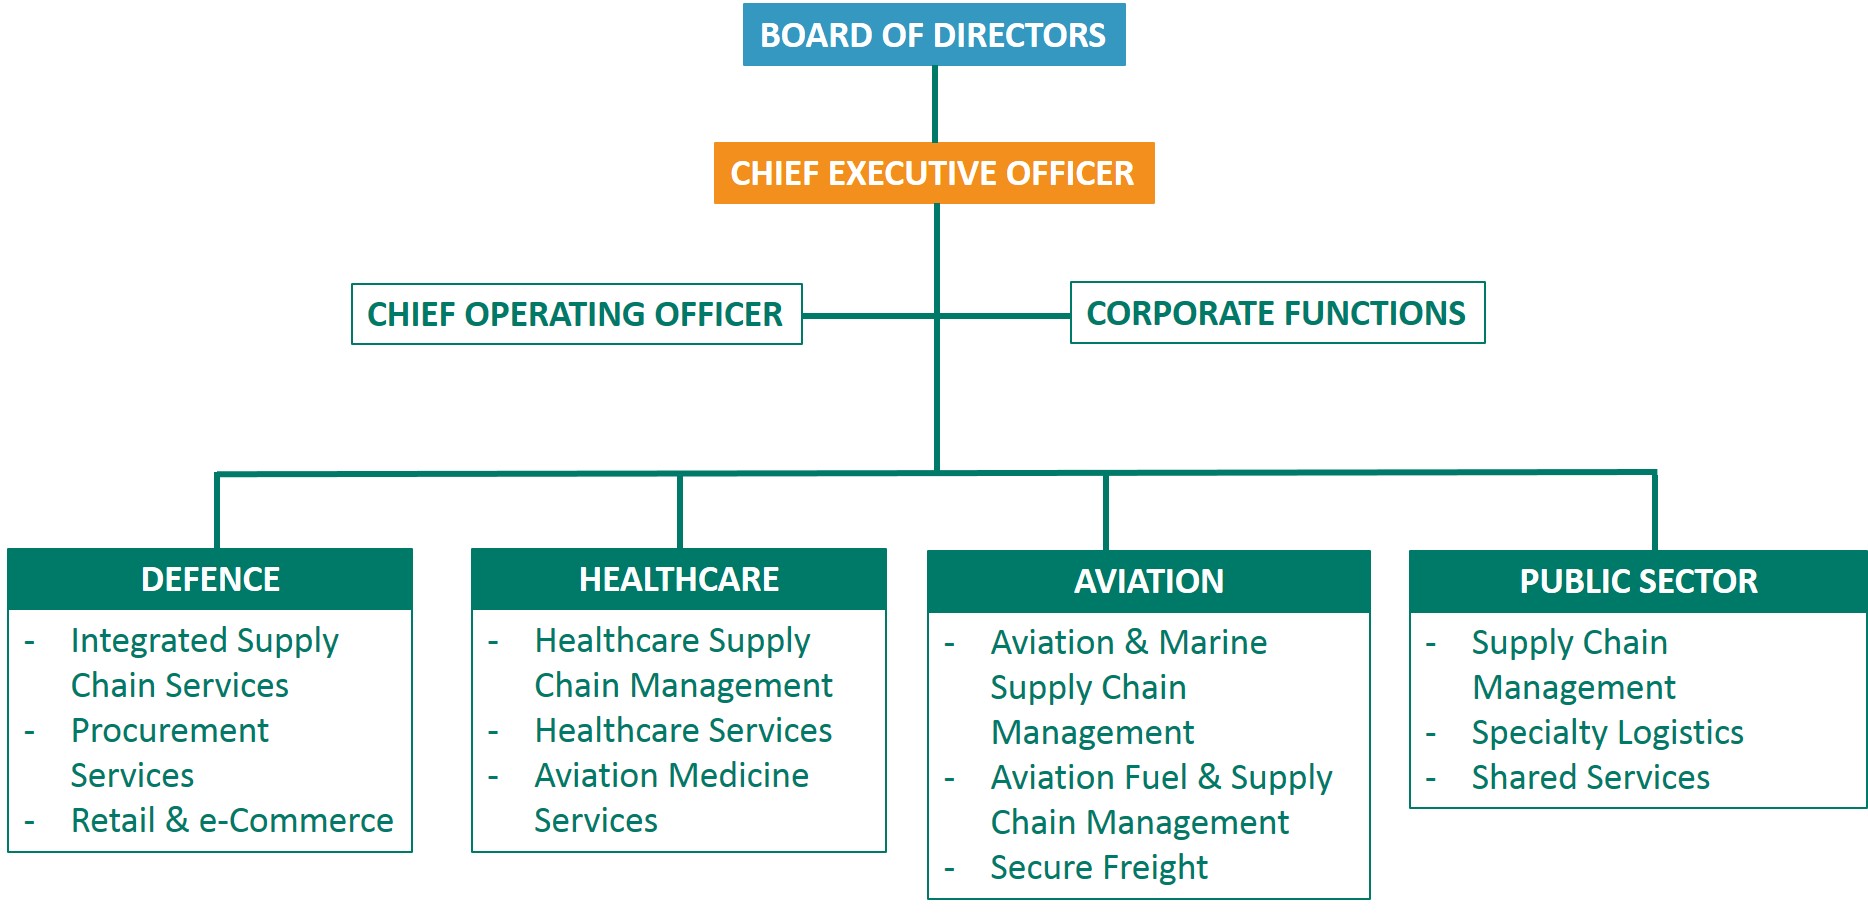 Toll Group Organisational Chart